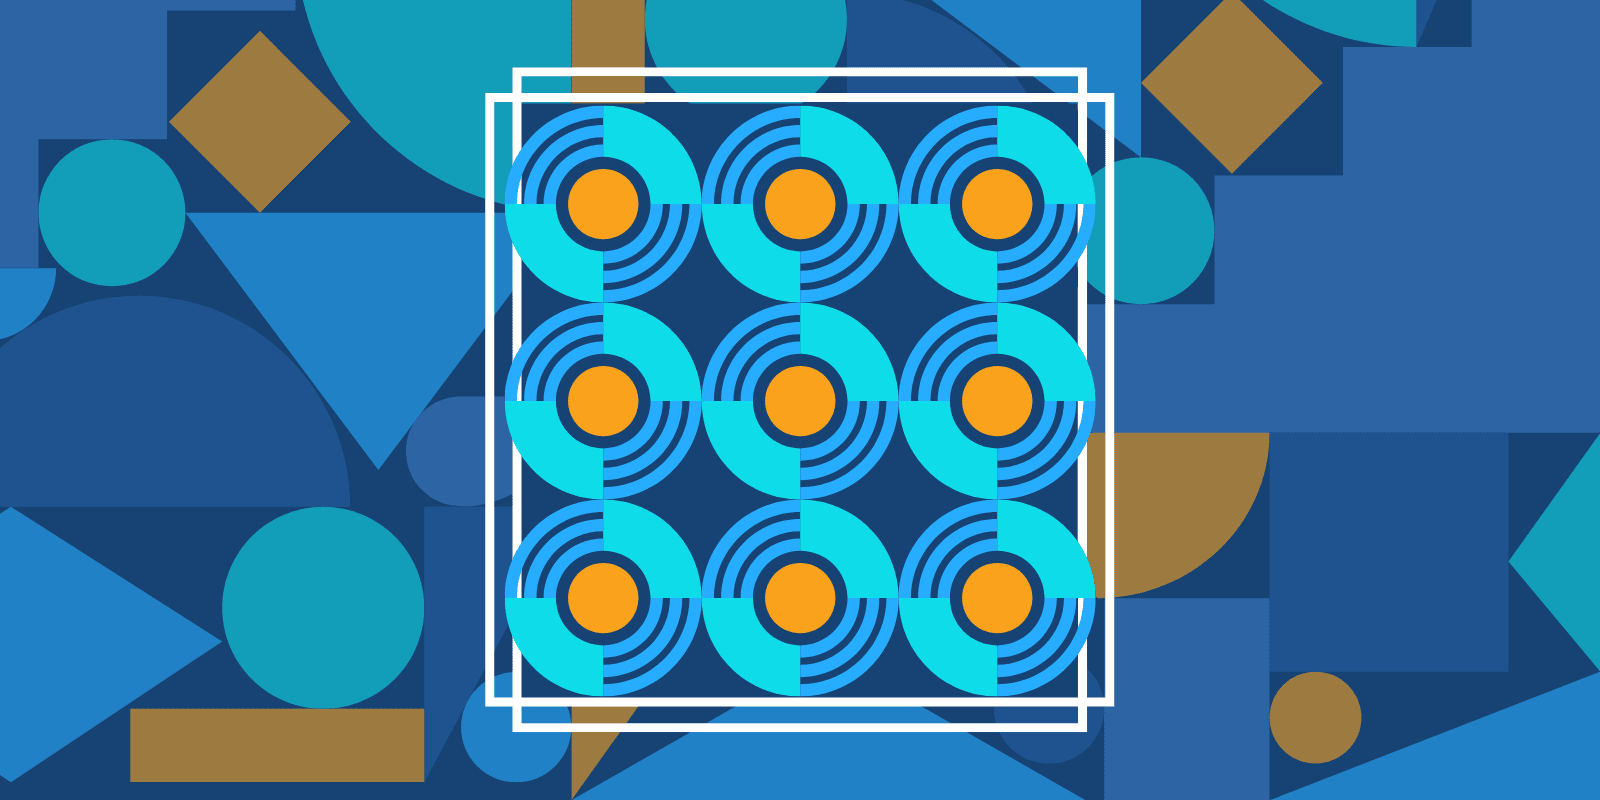 A well organized circles inside a frame on top of a chaotic vector shape background